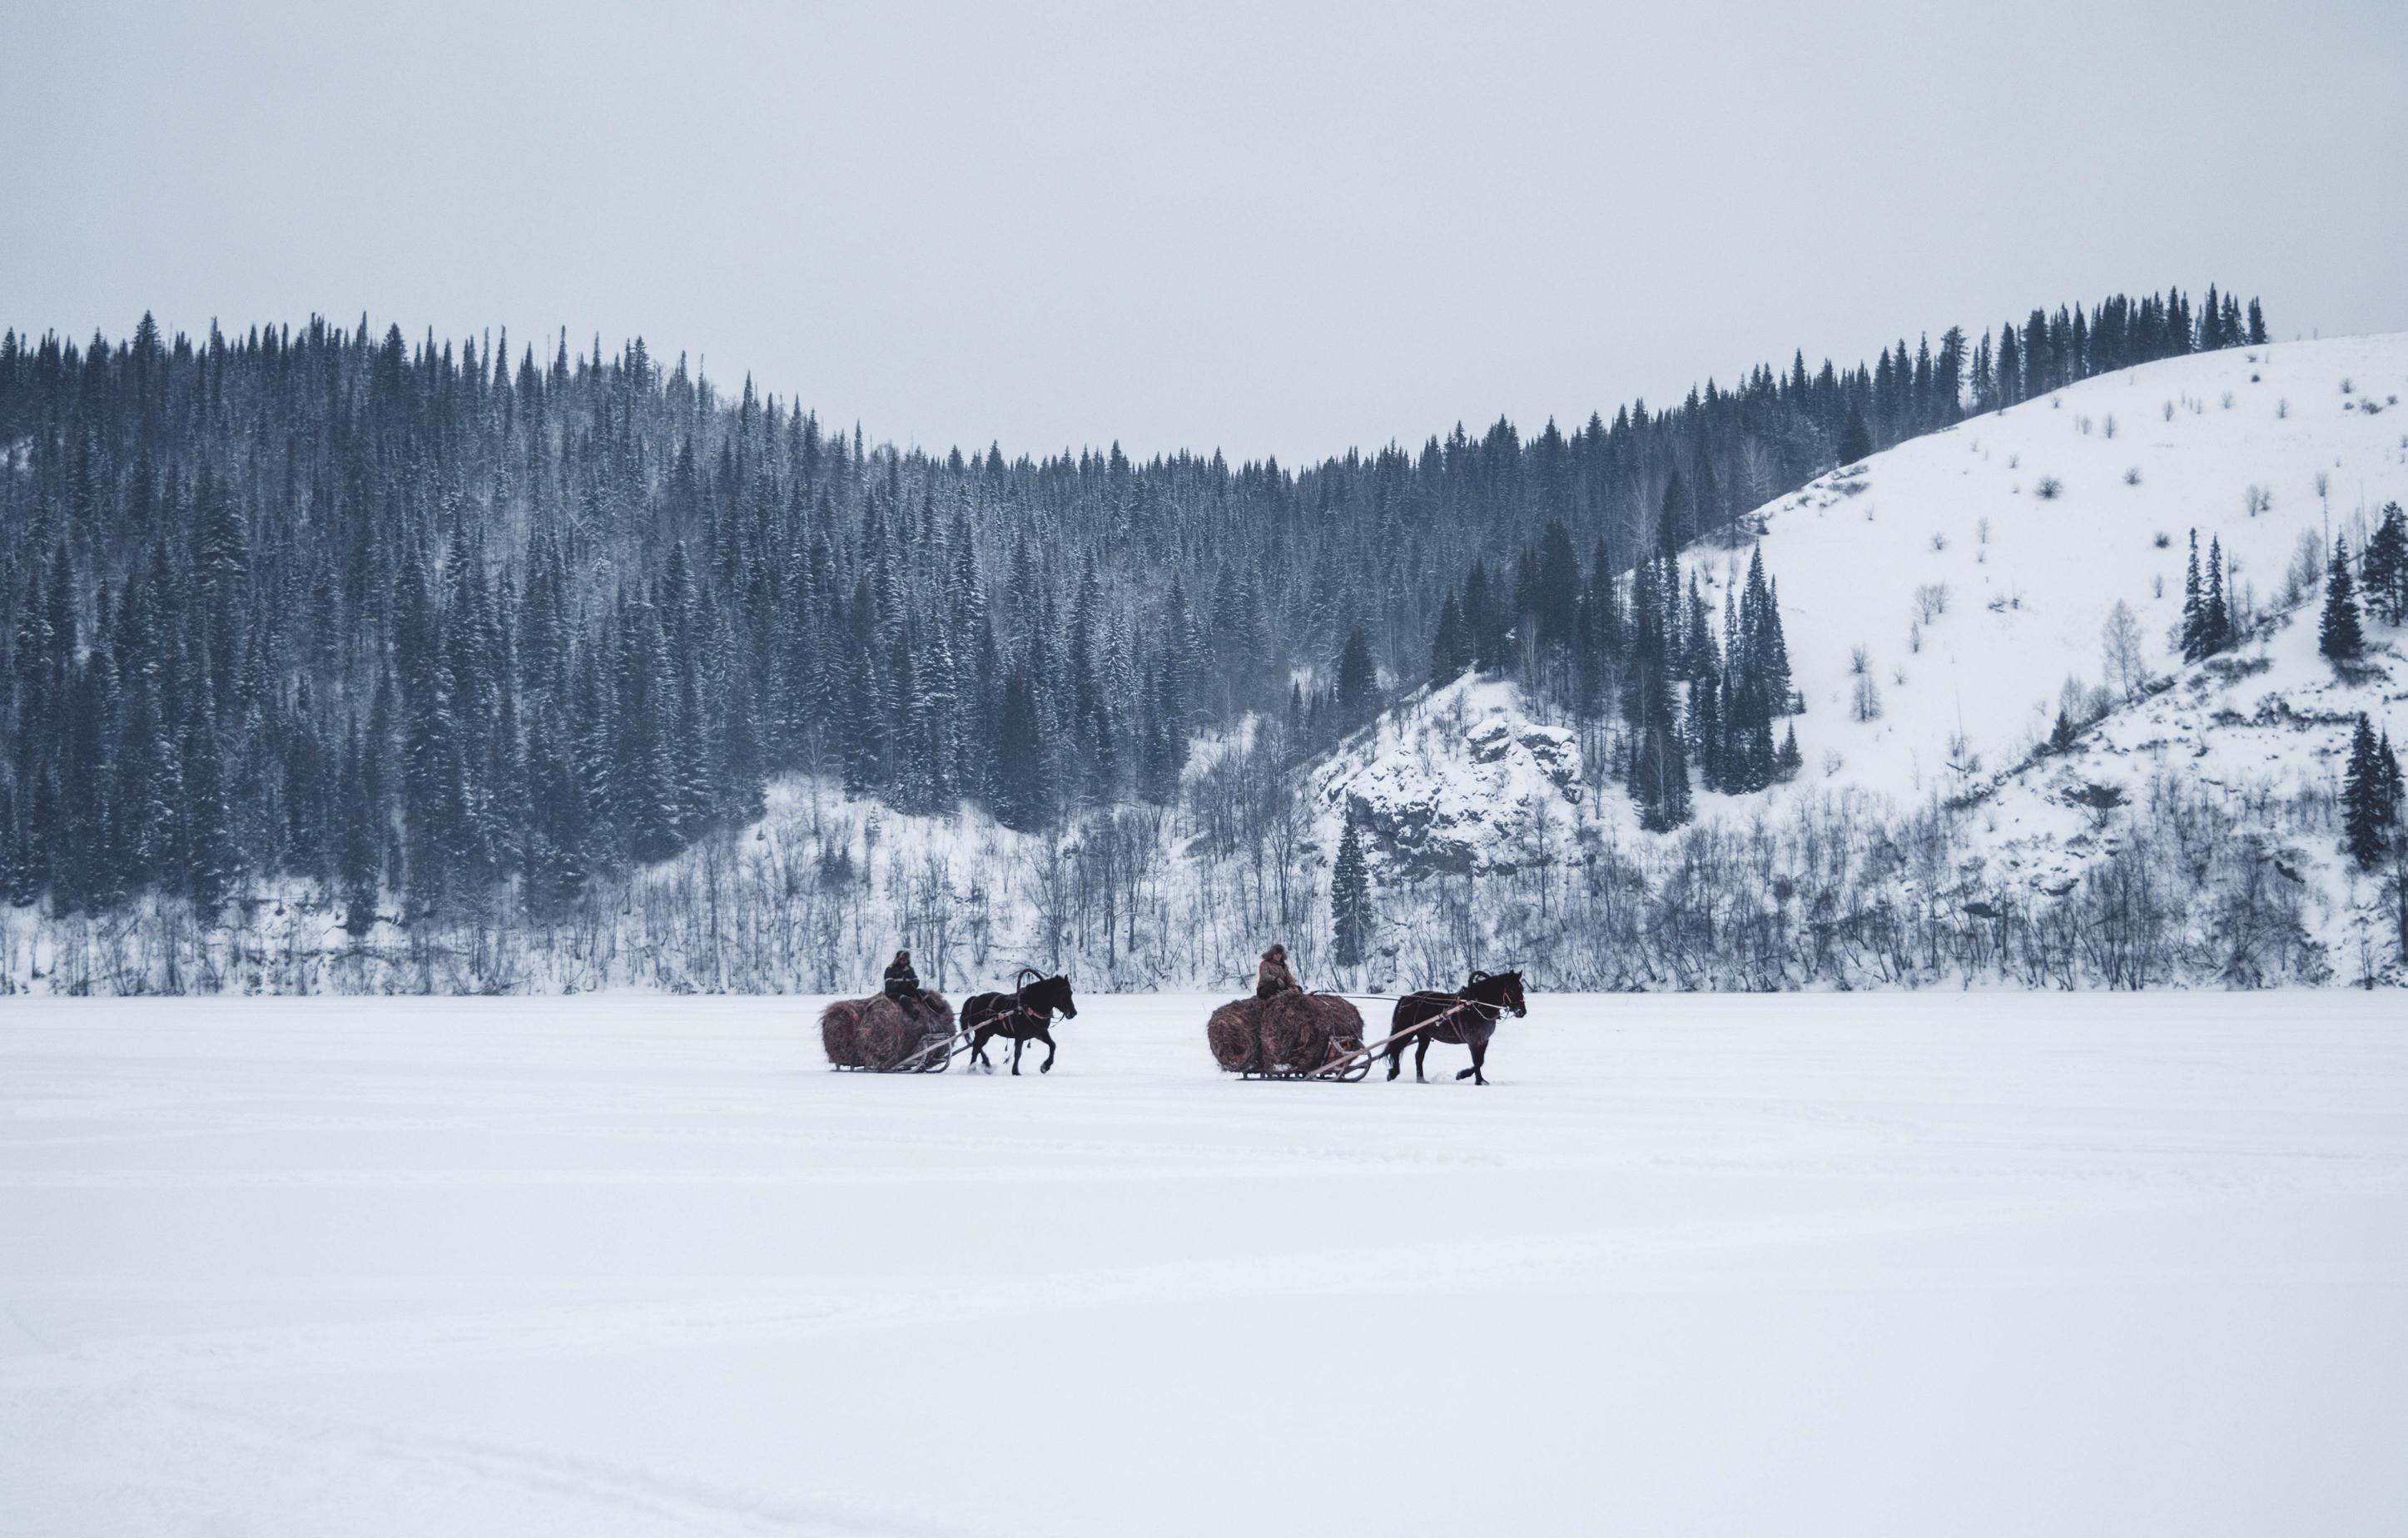 Advantages of housing horses in winter